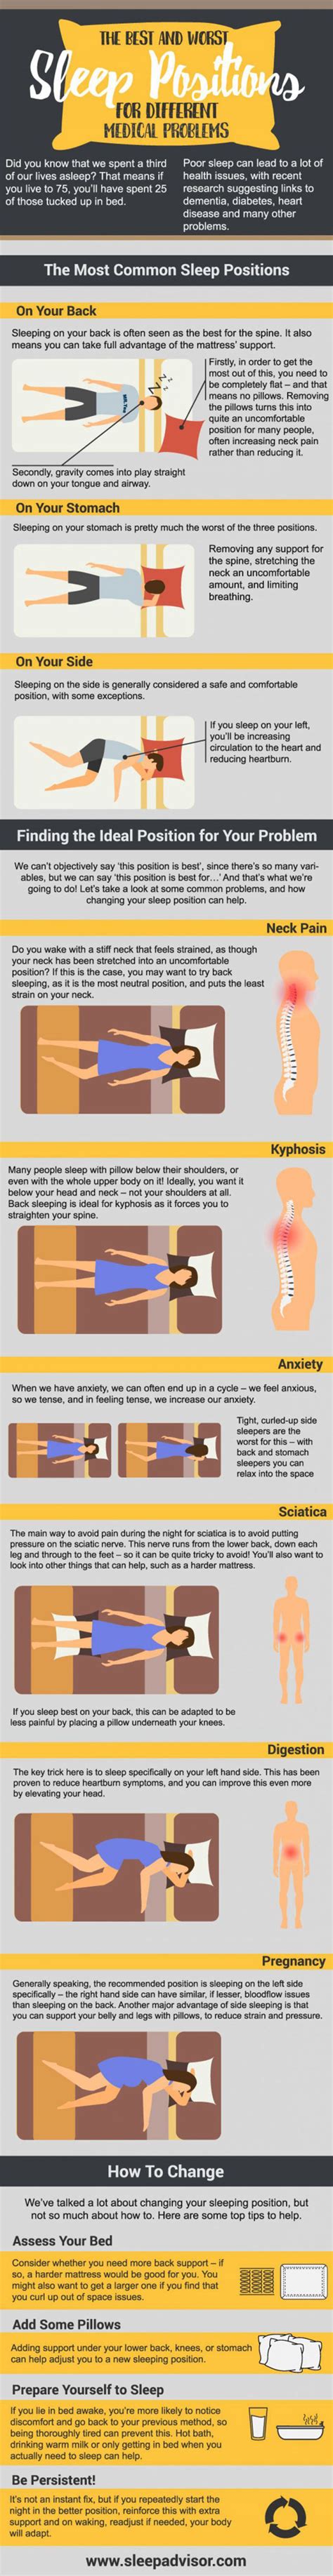 The Best And Worst Sleep Positions Infographic Laptrinhx